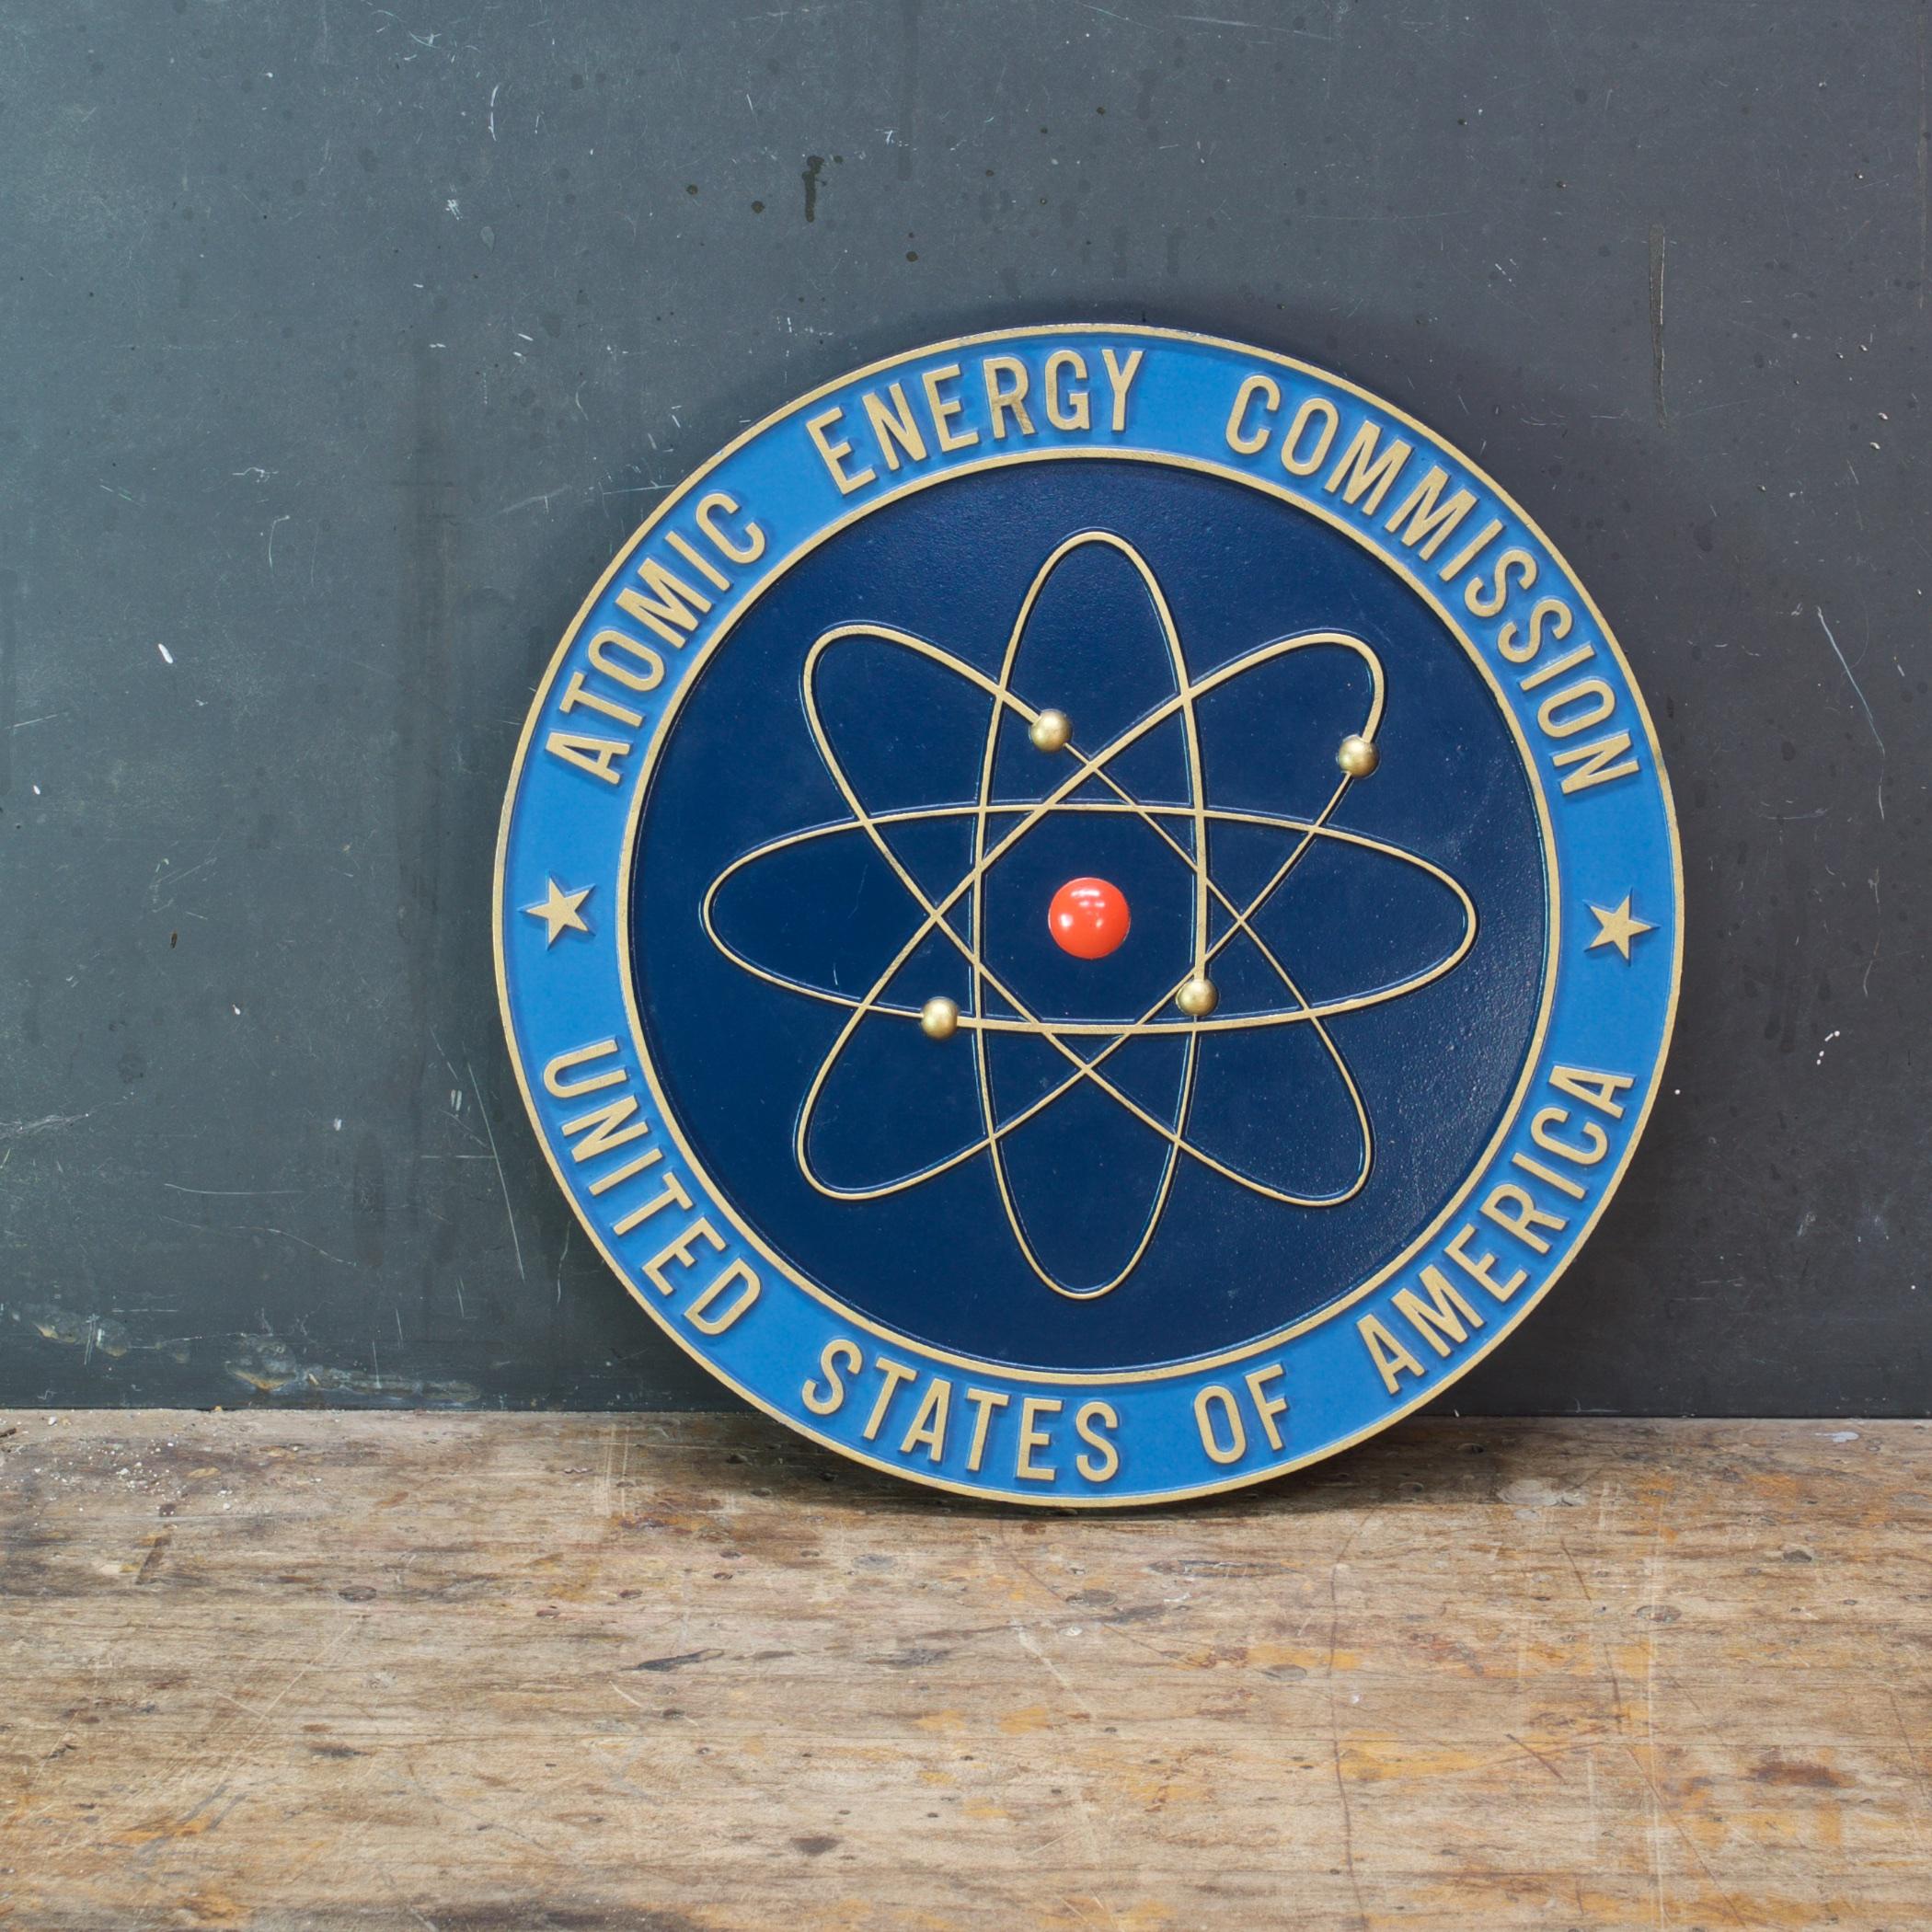 1950s Atomic Energy Commission Building Office Logo Wall Plaque AEC Oppenheimer In Good Condition For Sale In Hyattsville, MD